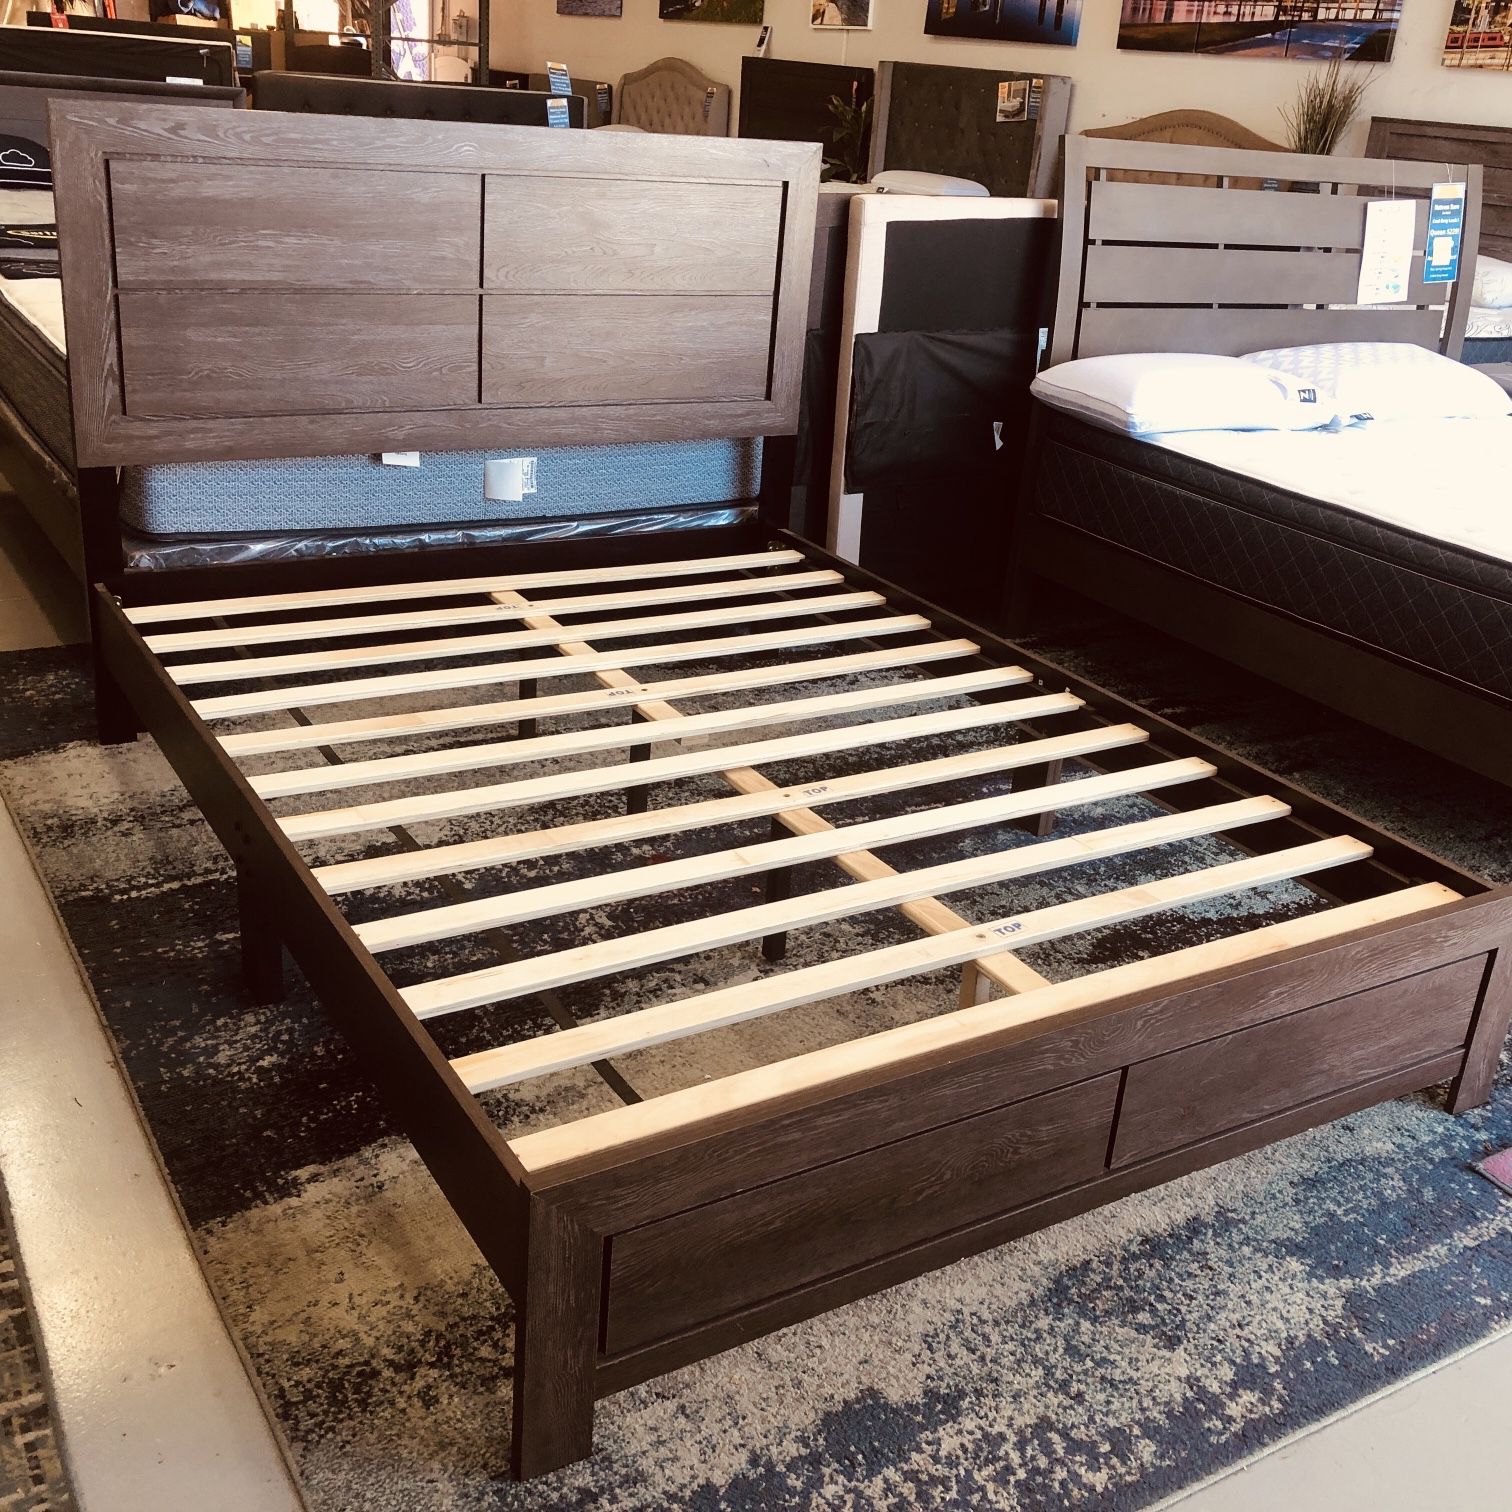 New Platform Bed Frame Wooden Look King Queen And Full From Only 